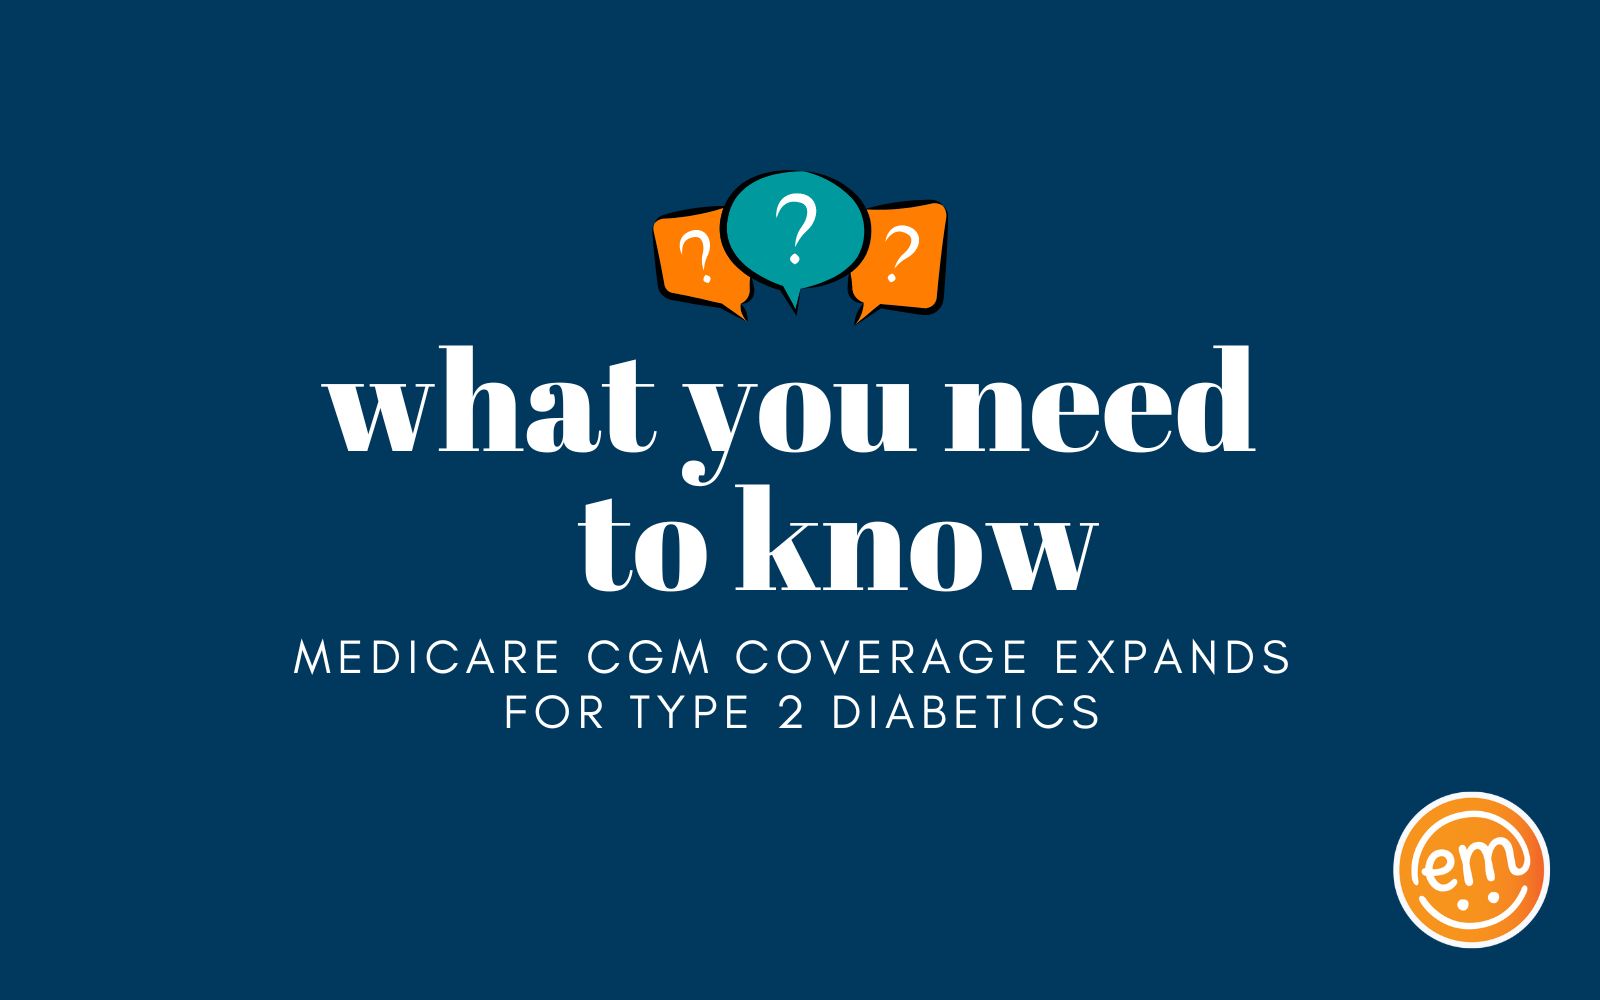 Medicare Expands CGM Coverage for Type 2 Diabetes– What You Need to Know!